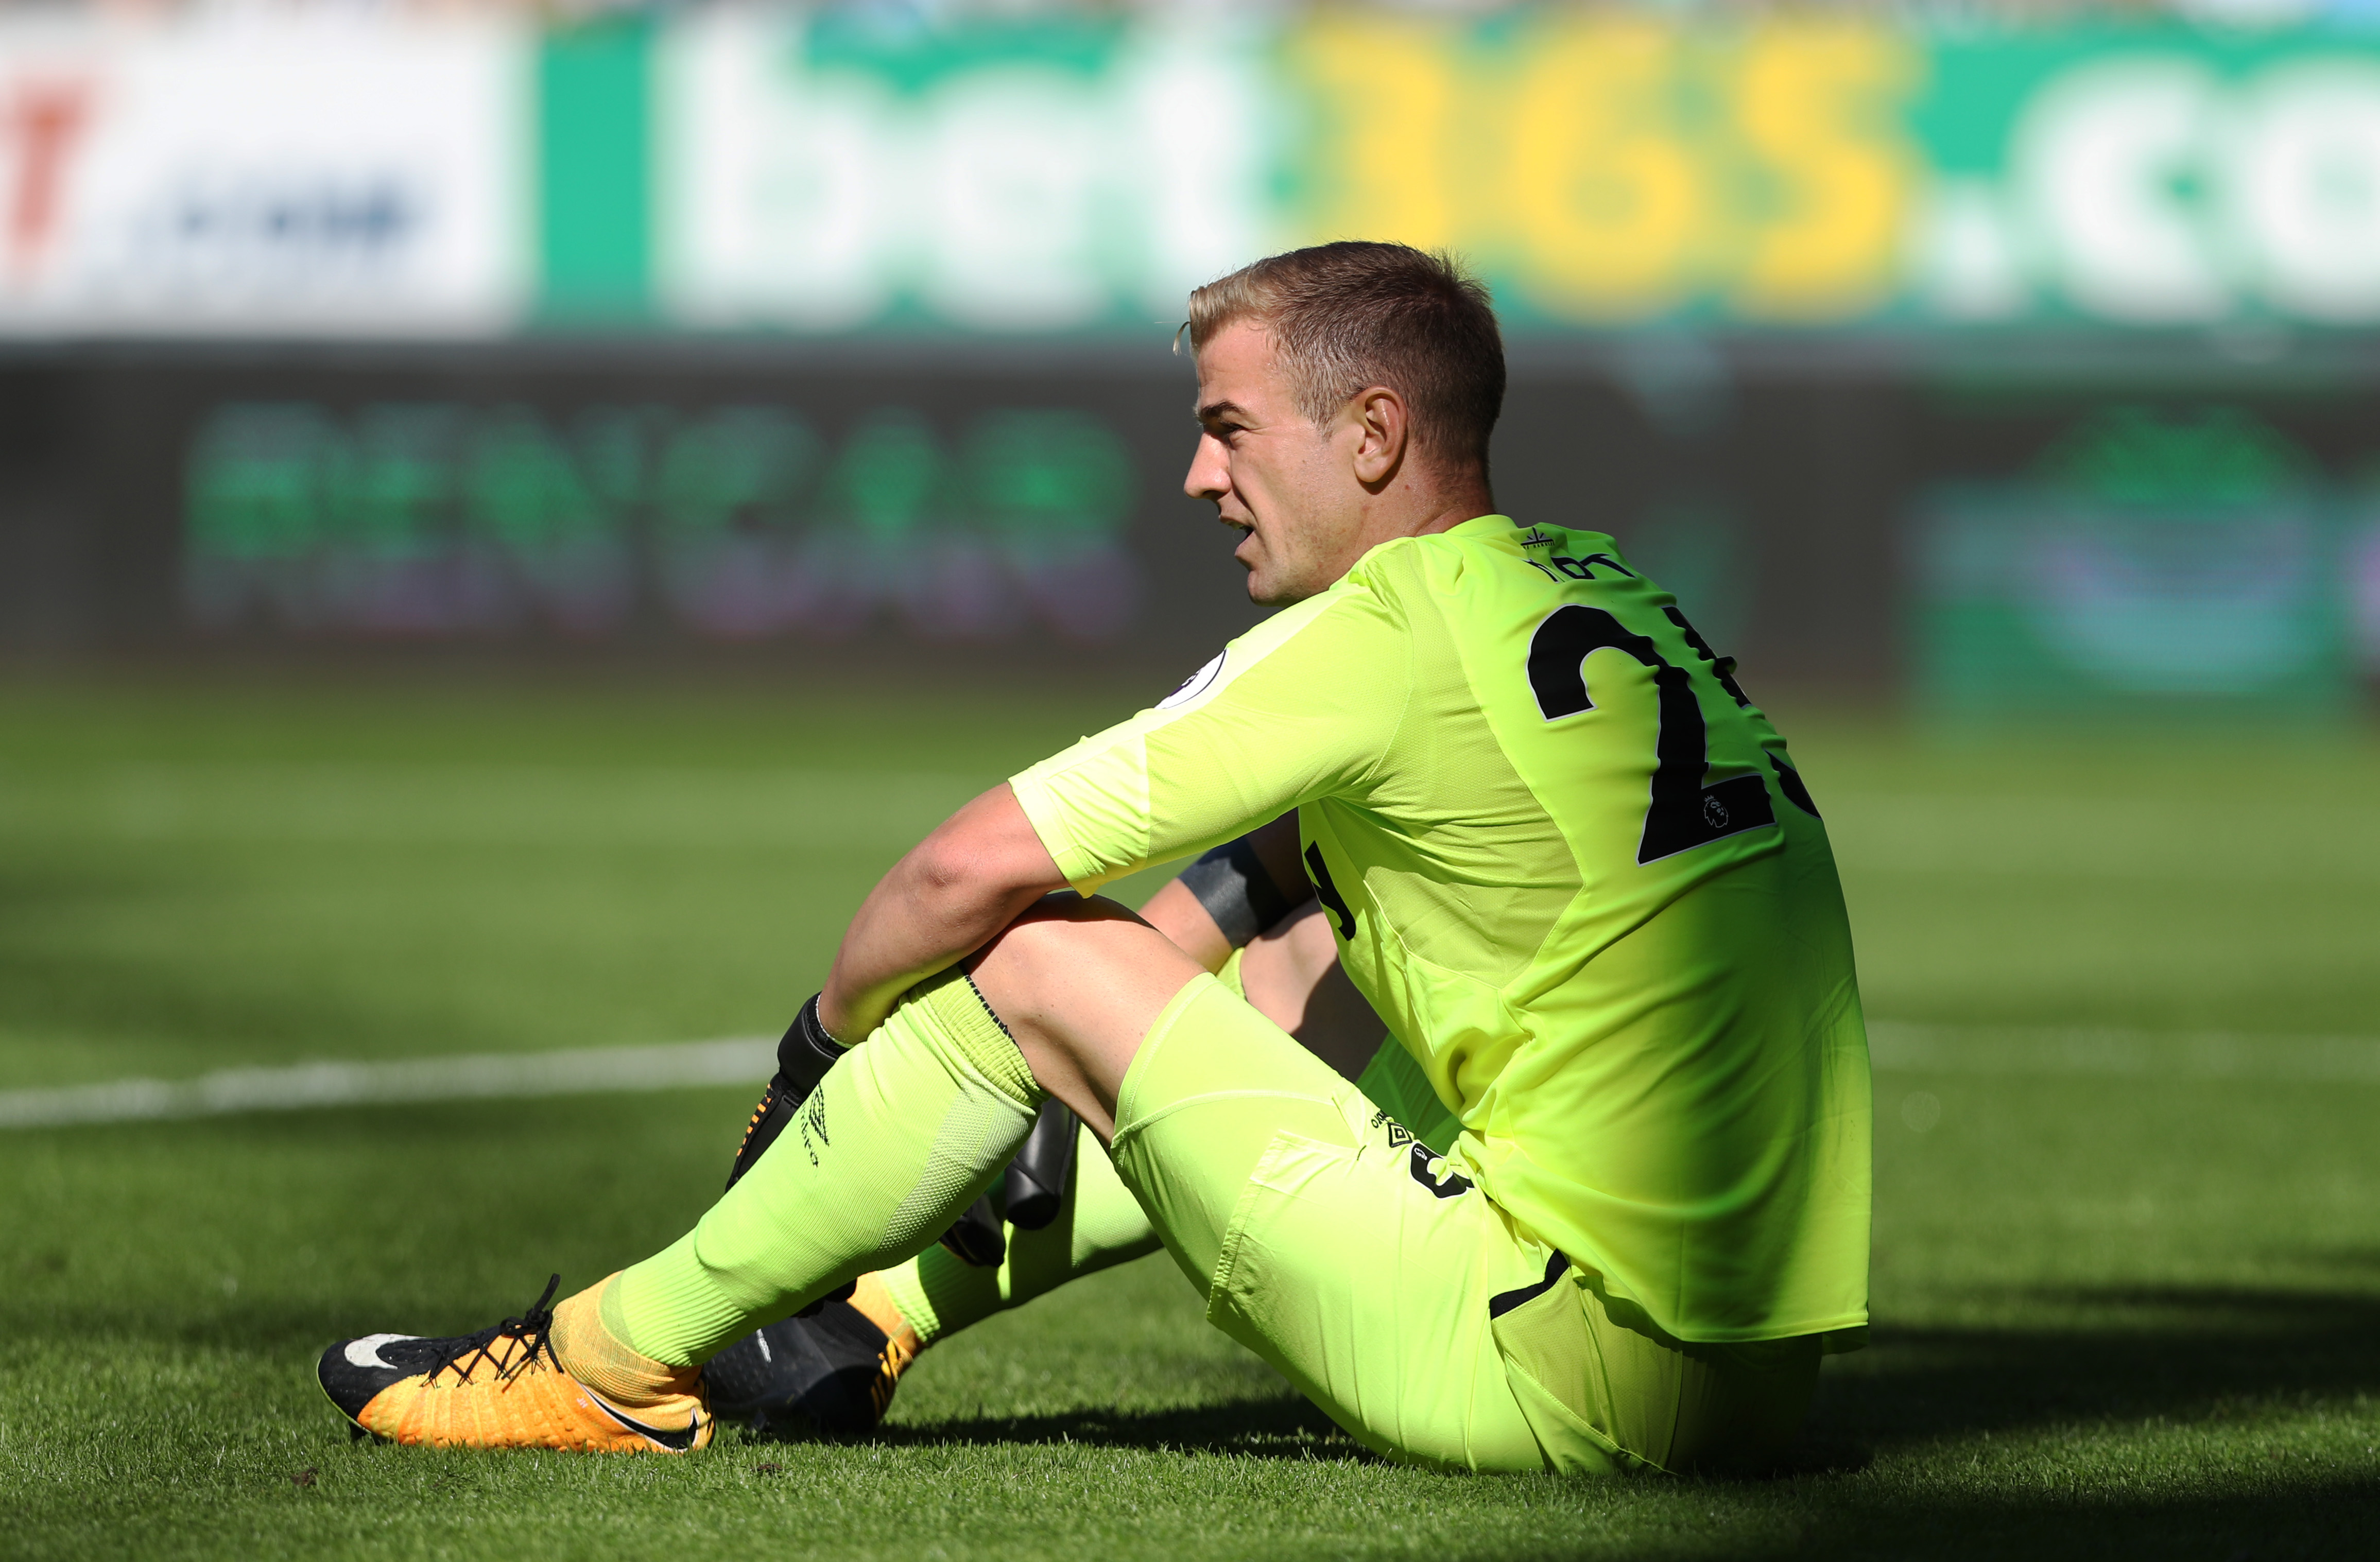 NEWCASTLE UPON TYNE, ENGLAND - AUGUST 26:  Joe Hart of West Ham United looks on during the Premier League match between Newcastle United and West Ham United at St. James Park on August 26, 2017 in Newcastle upon Tyne, England. (Photo by Ian MacNicol/Getty Images)